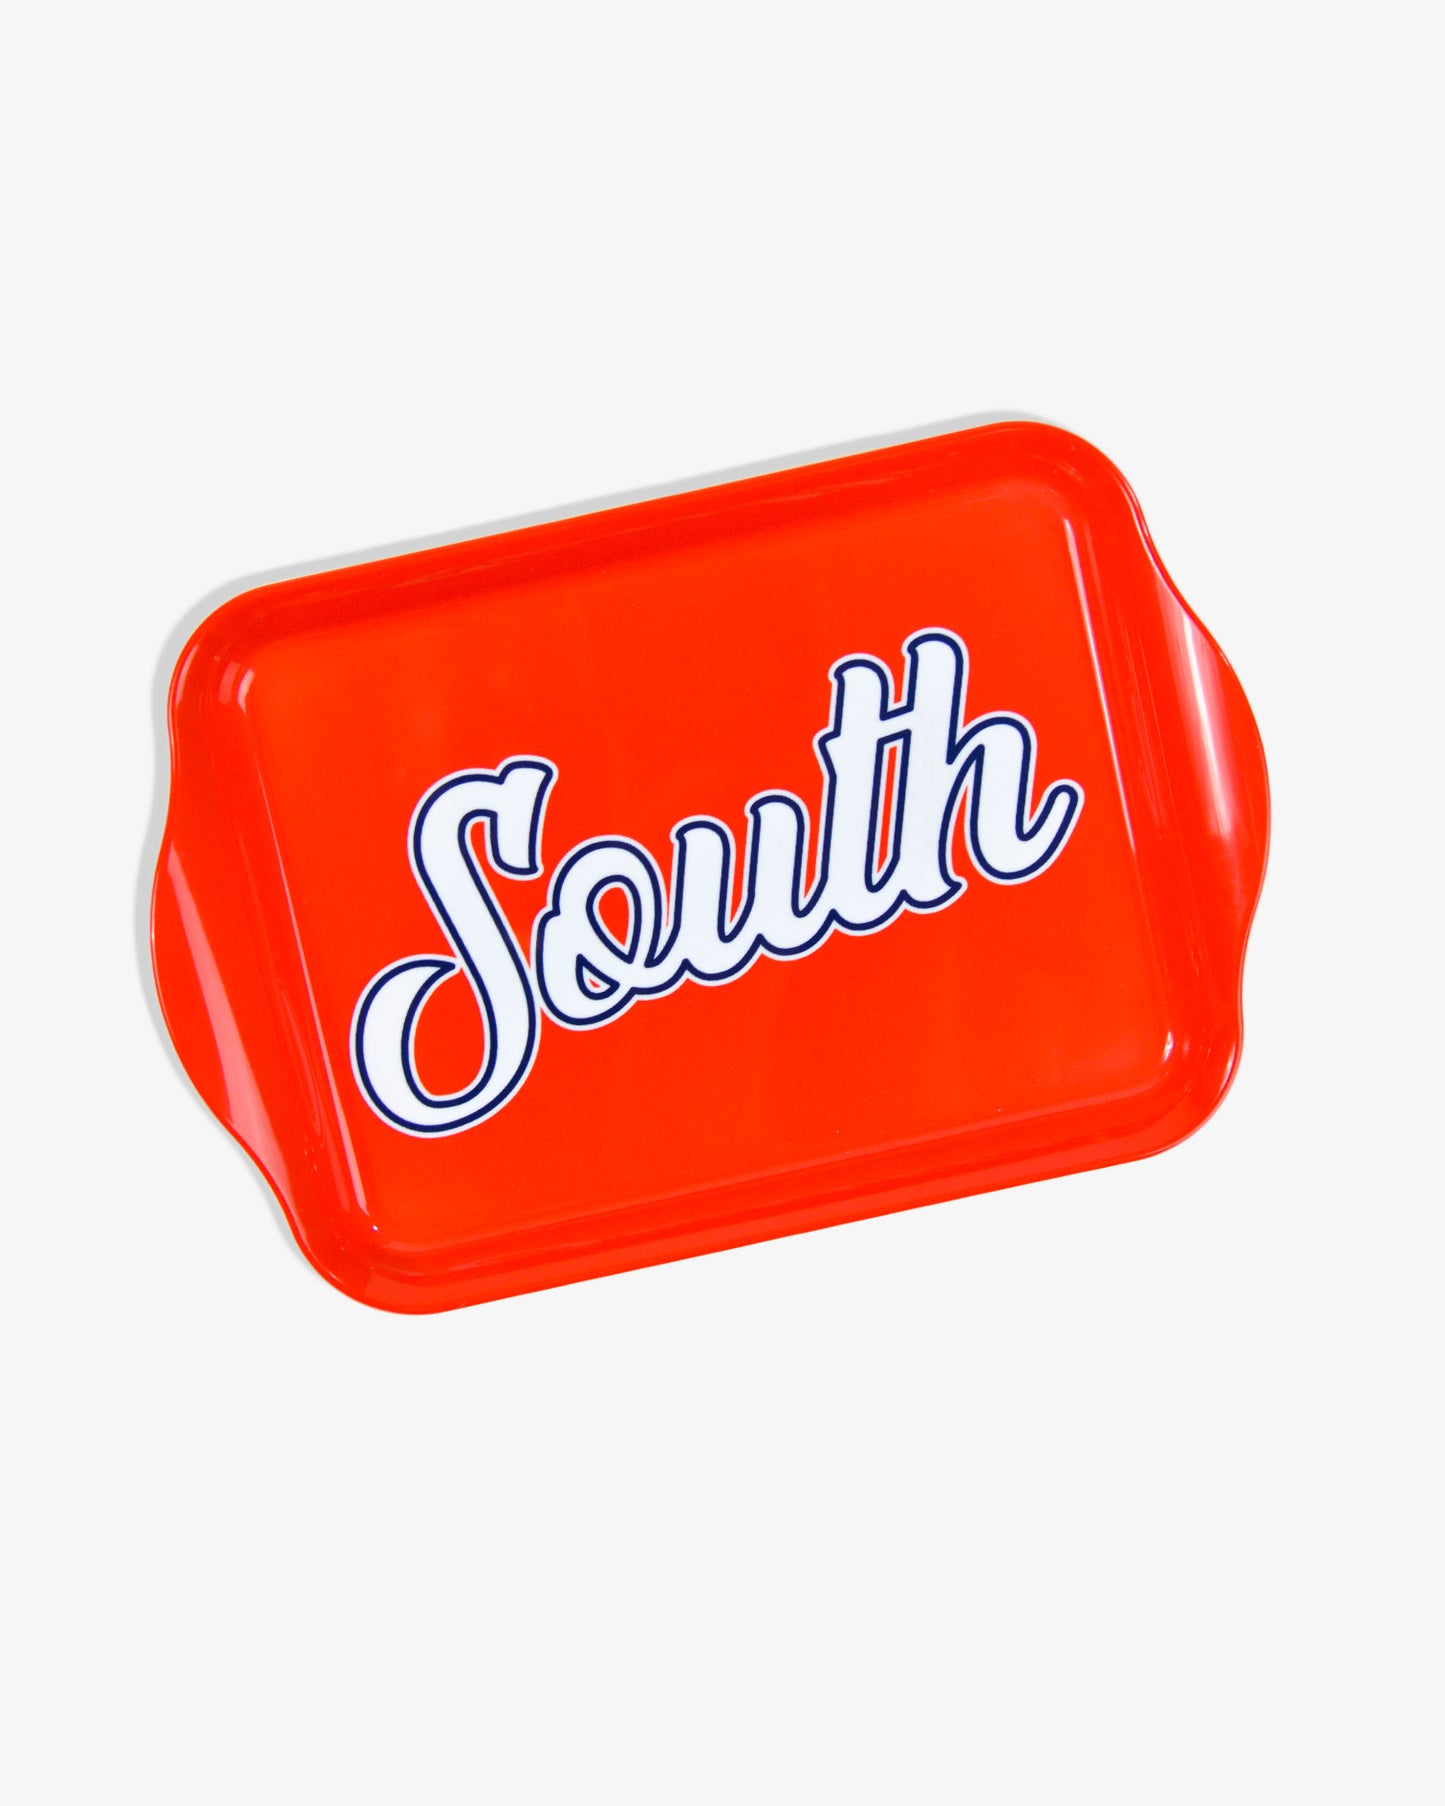 South Rolling Tray